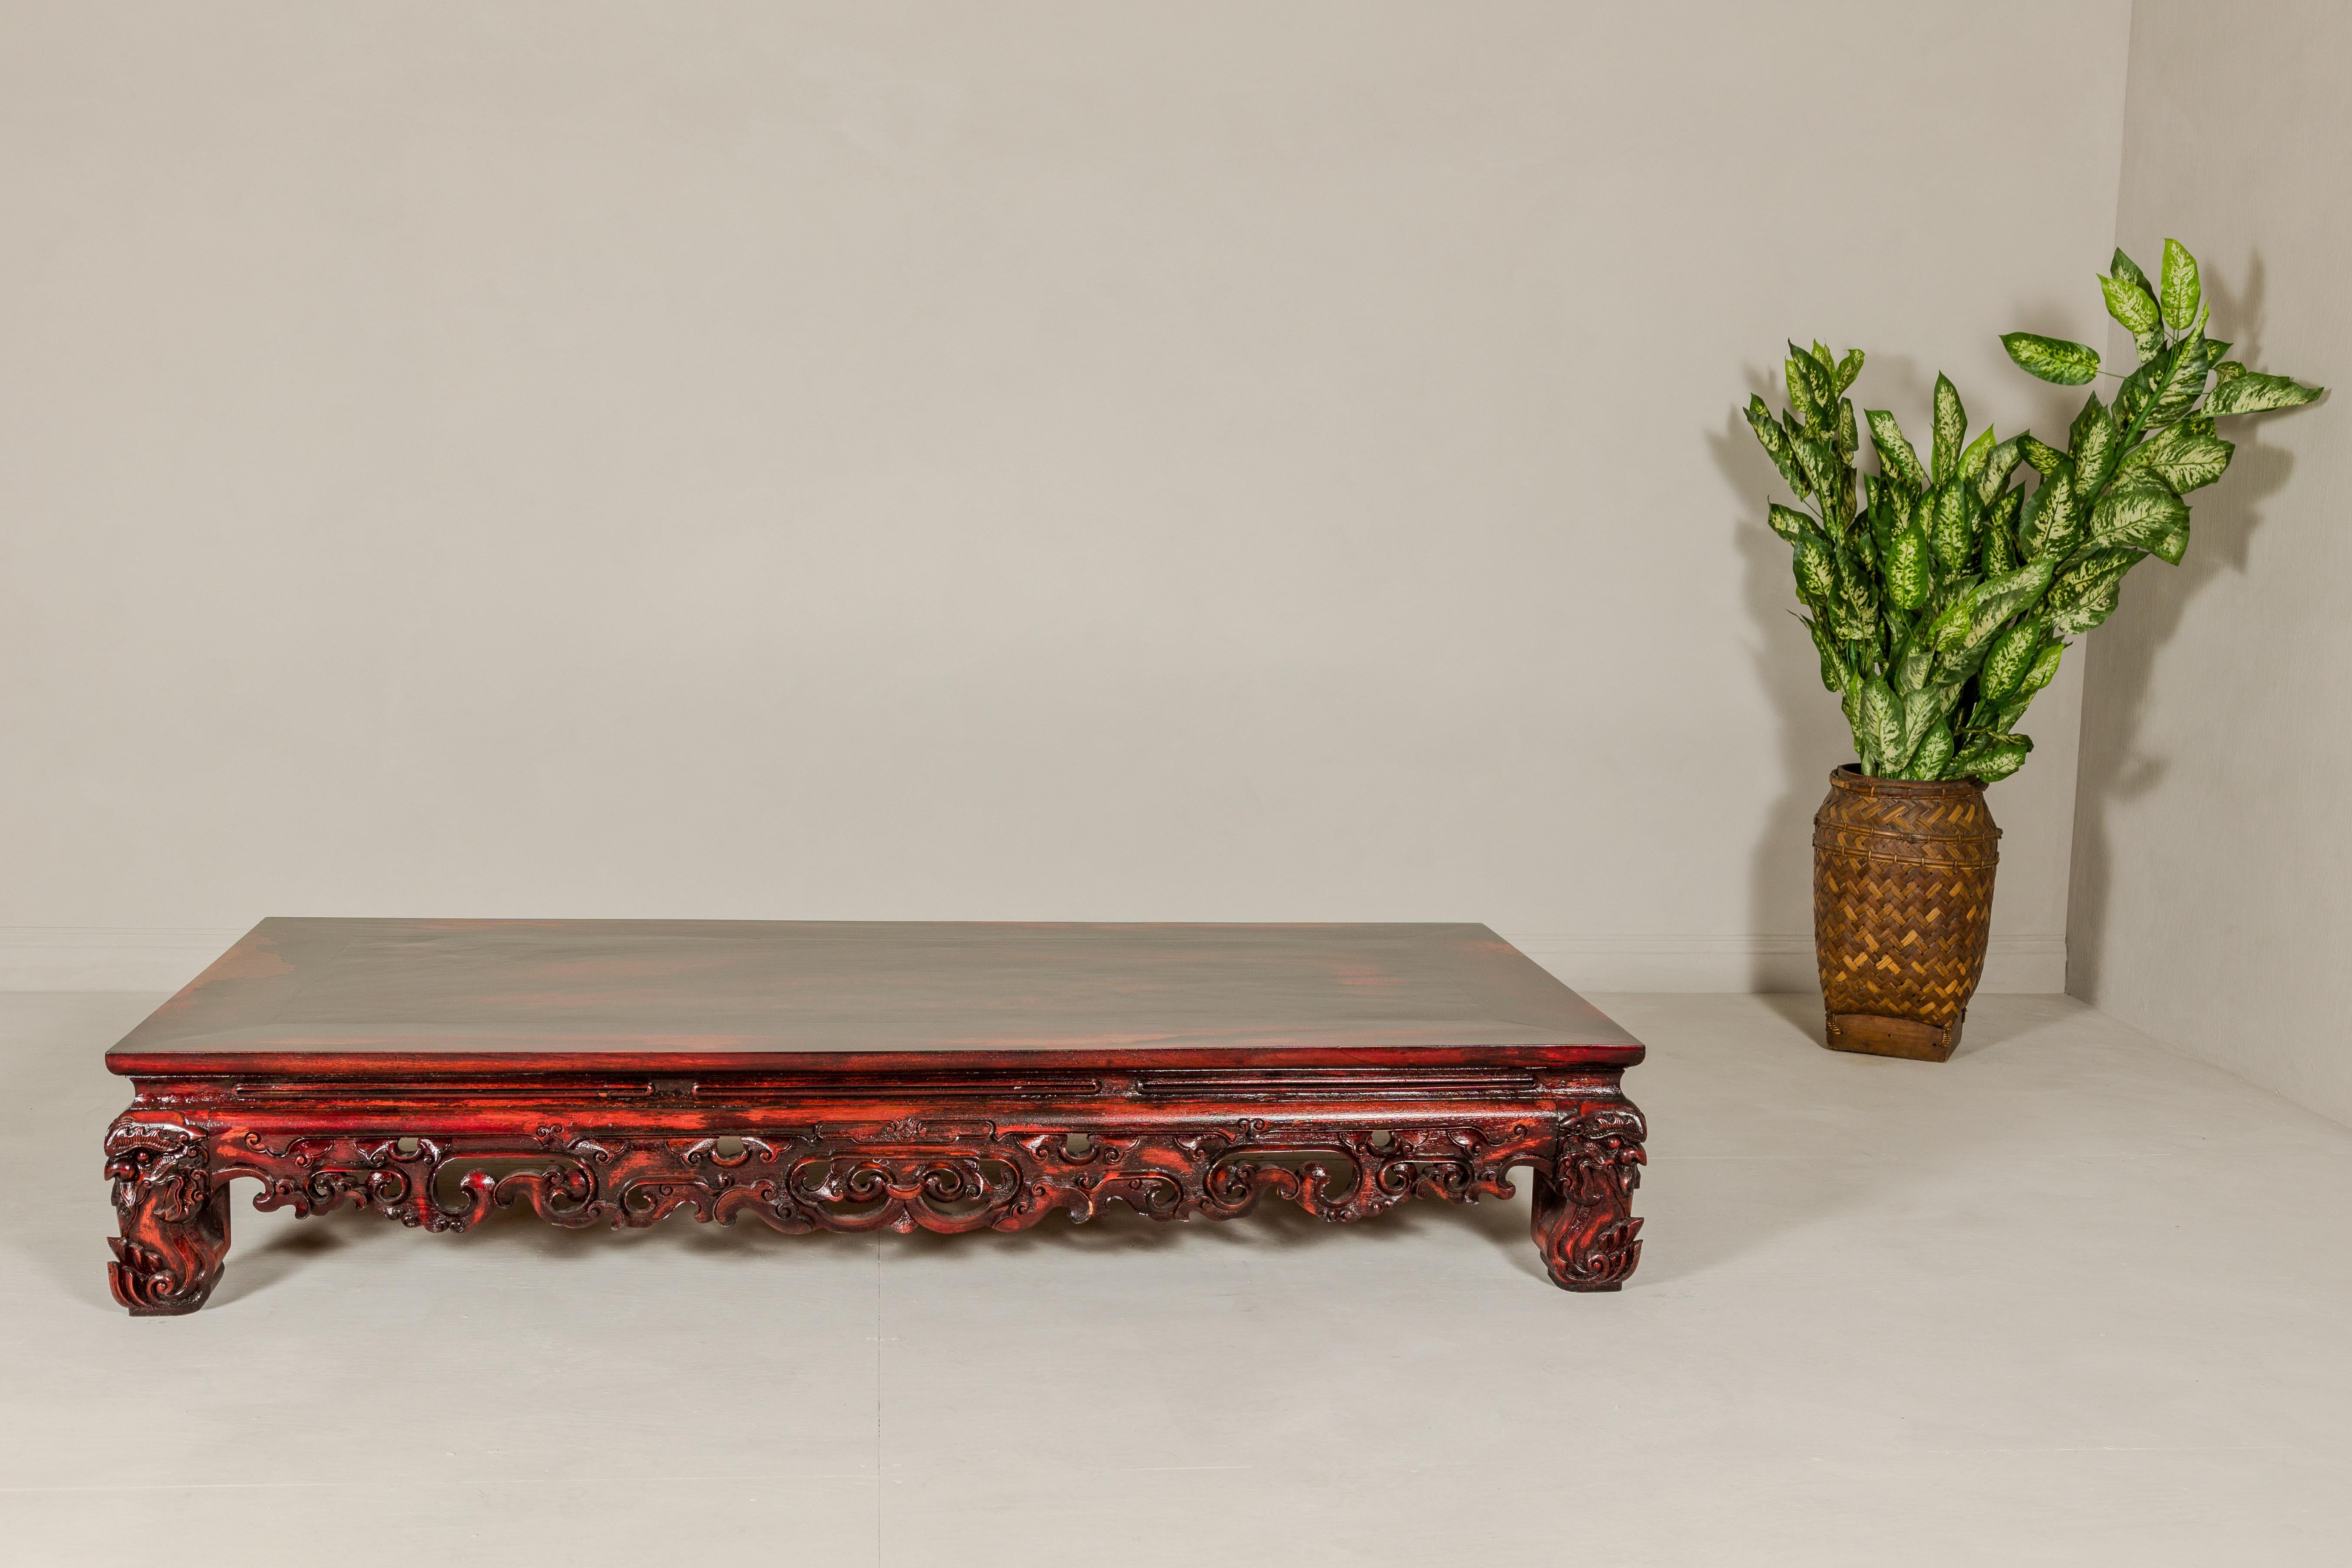 Qing Dynasty Low Kang Coffee Table with Reddish Brown Finish and Carved Décor For Sale 9